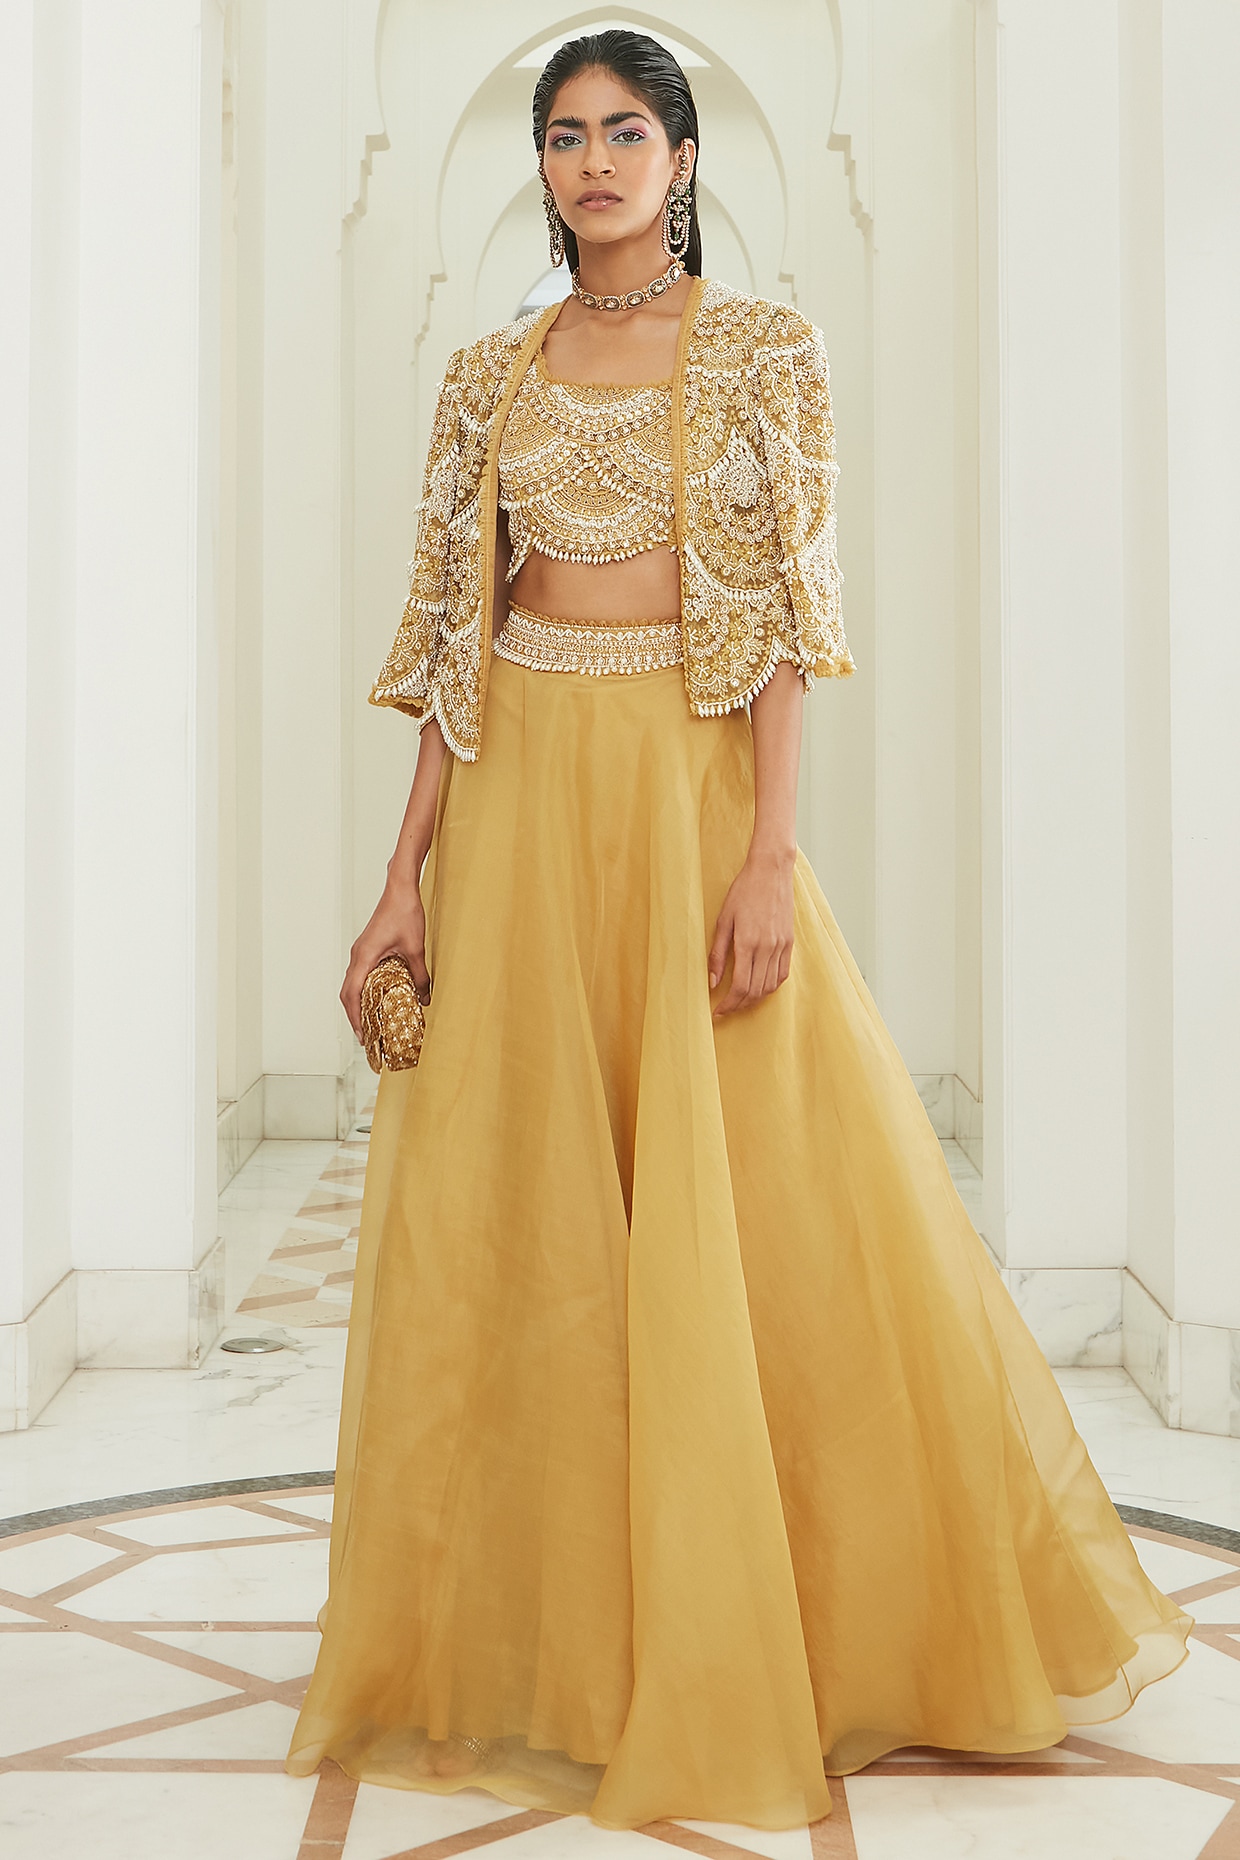 Buy Crop Top Lehenga Trends You Need To Watch Out For - Ethnic Plus